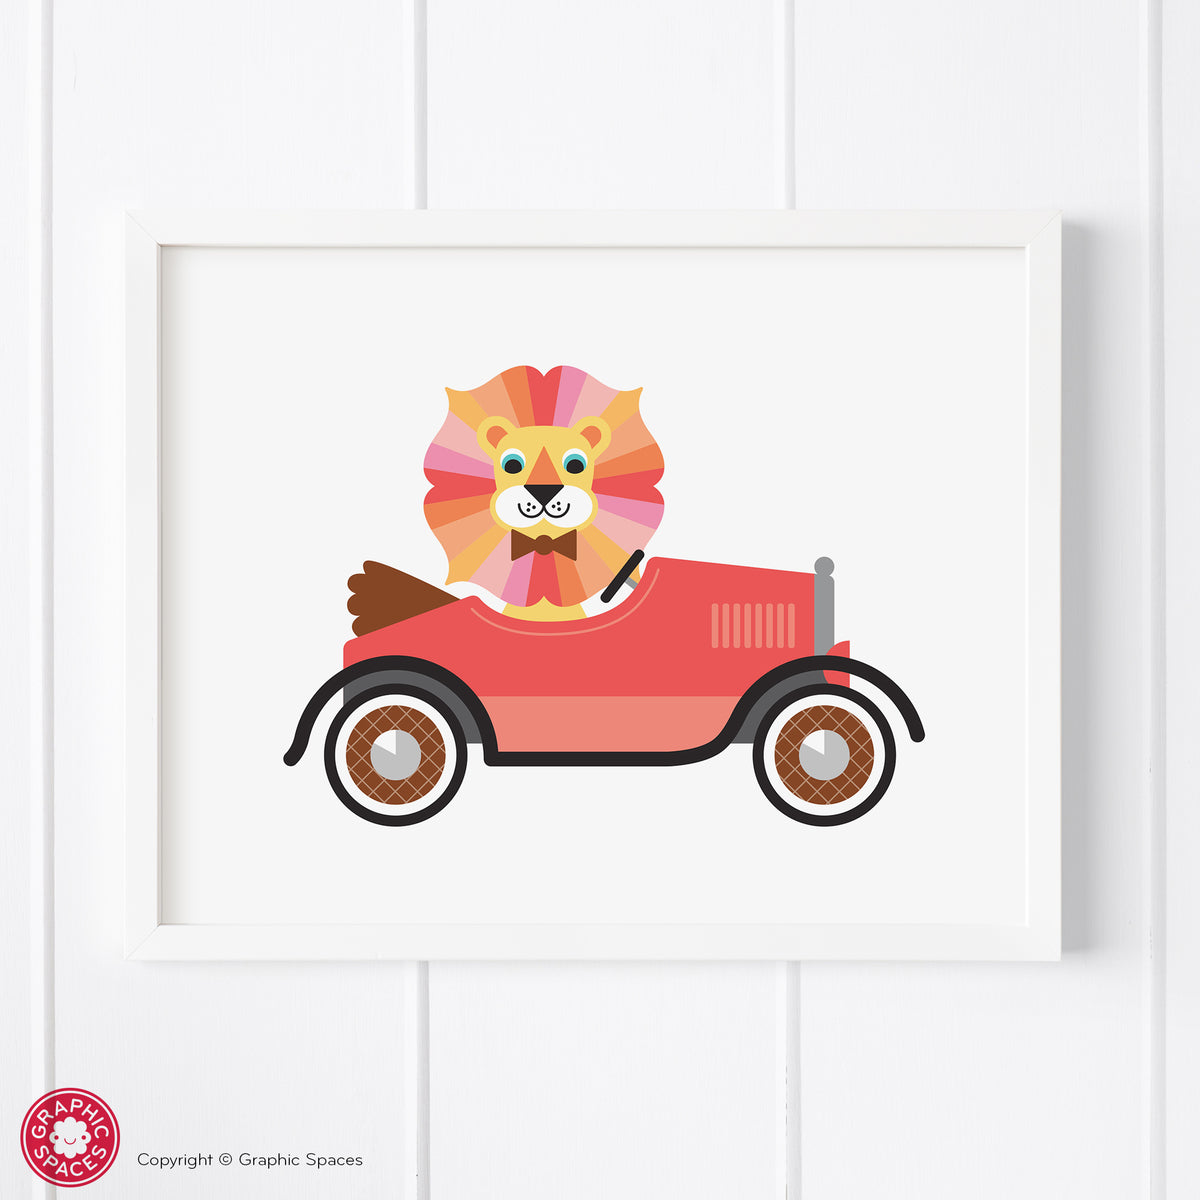 Animals in Cars Art Prints - Set of 4